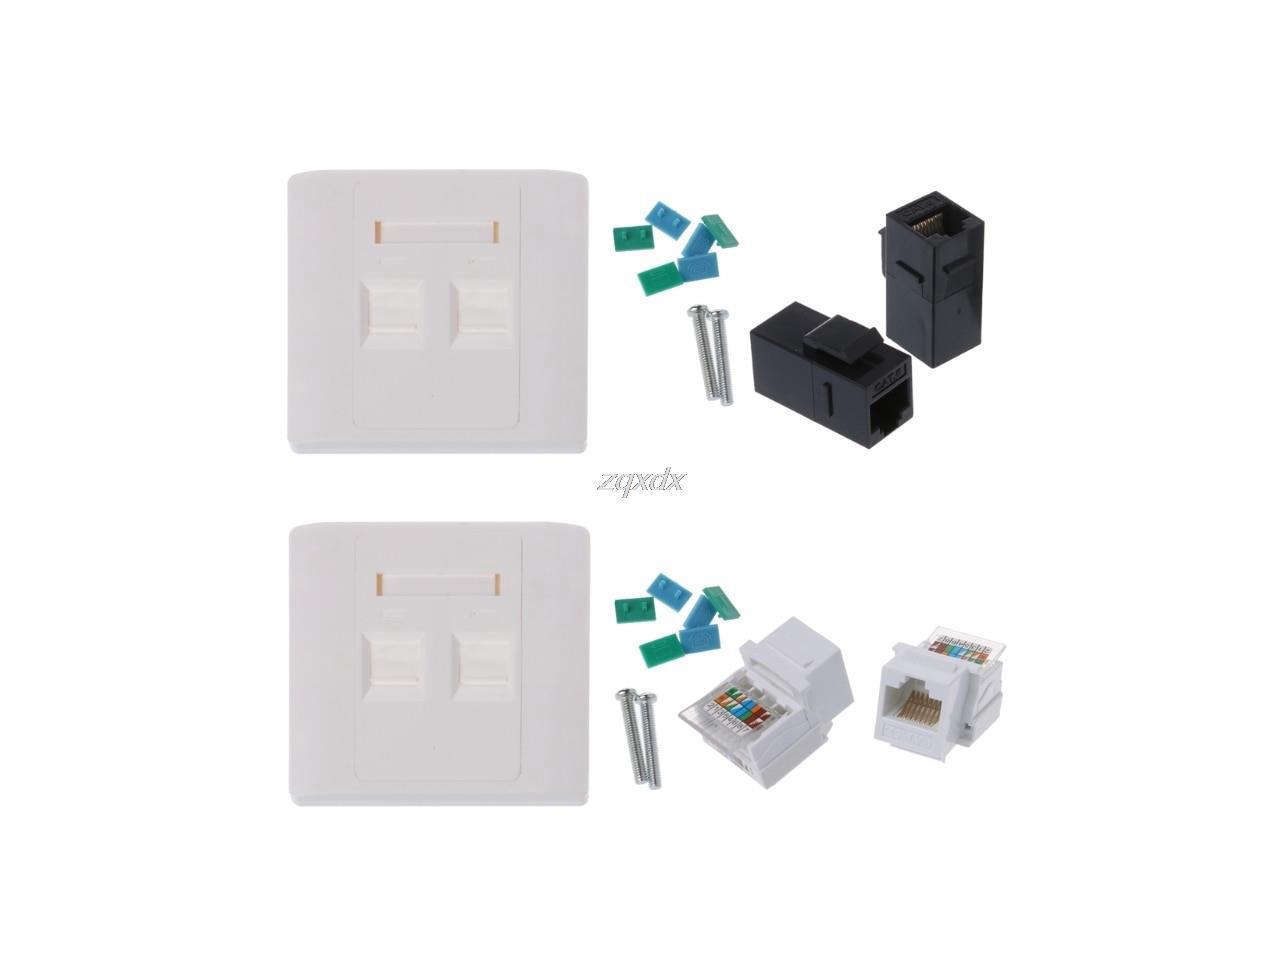 2 Ports RJ45 Network Wall Plate With Female to Female Connector CAT5e / CAT6 Z09 Drop ship